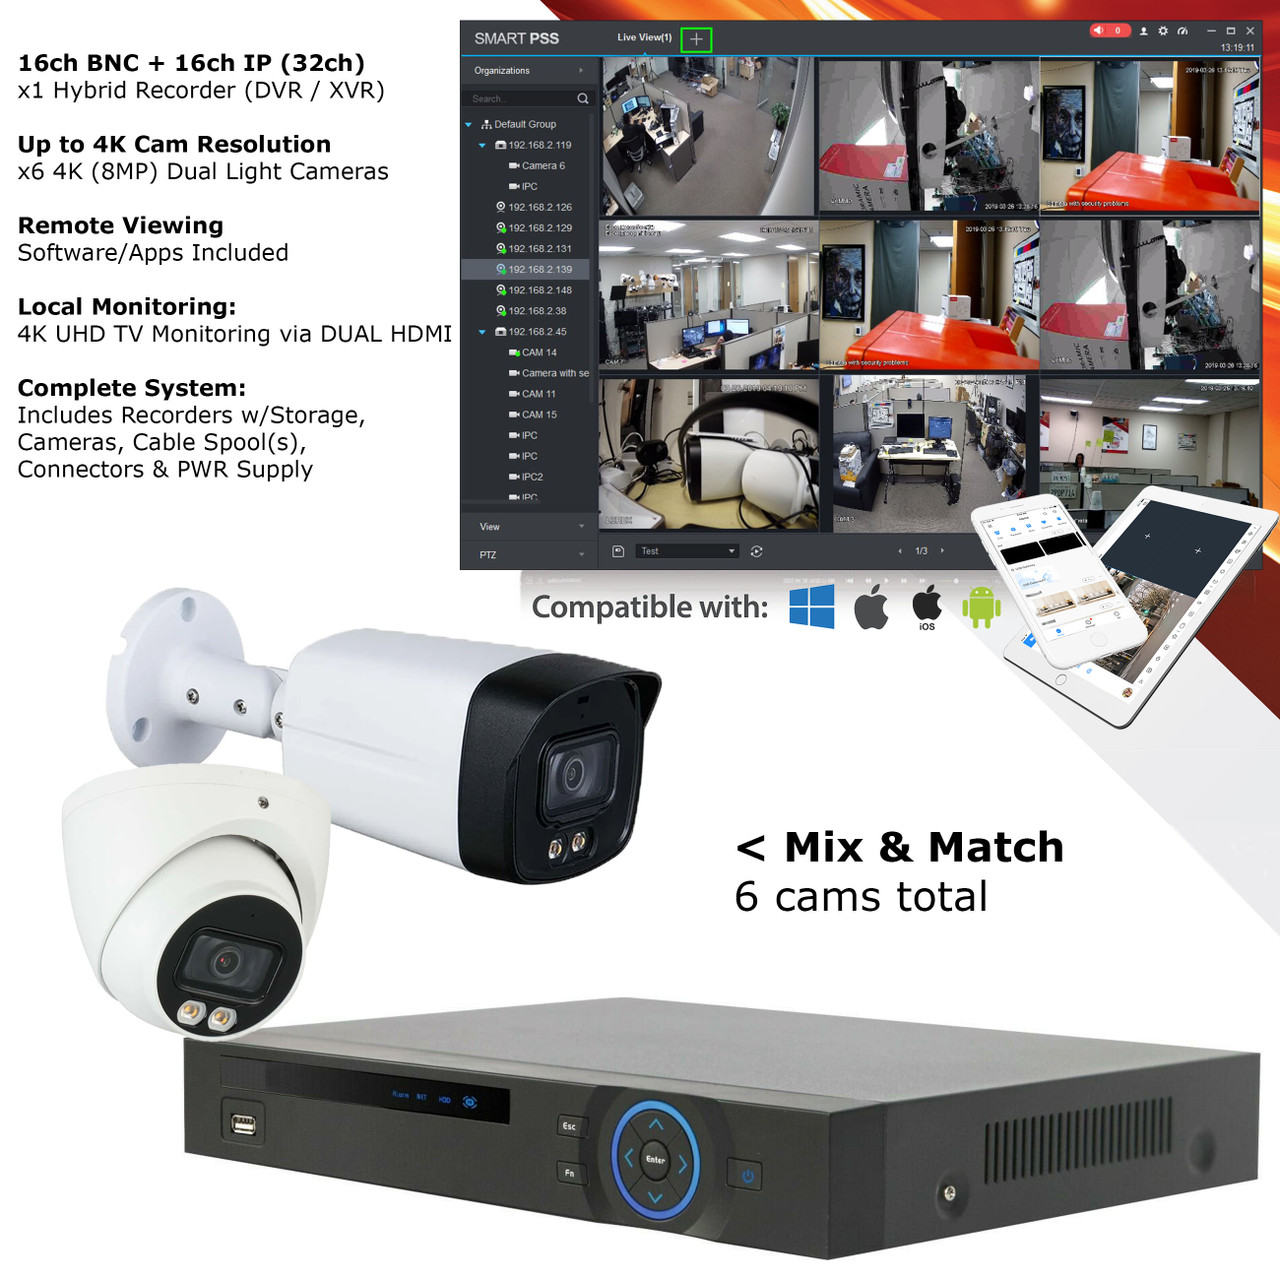 Easy Setup of Wireless Security Camera Systems by CCTV Camera